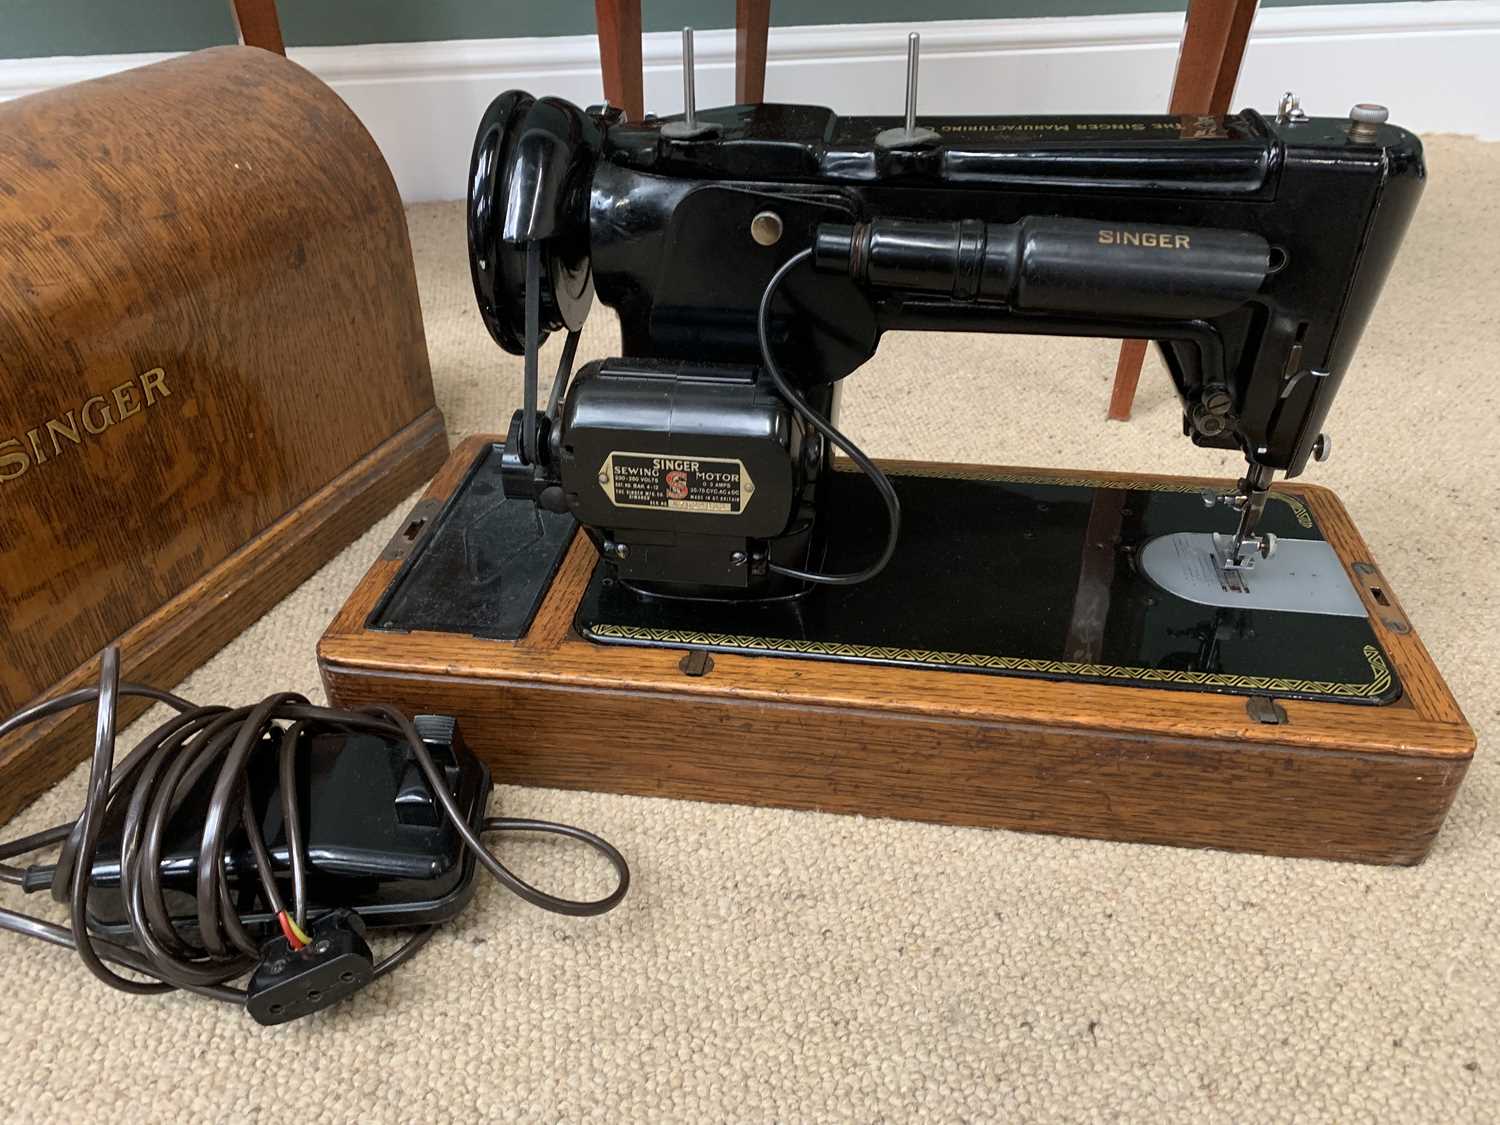 WOODEN CASED SINGER SEWING MACHINE, model 306K and two Italian style music work tables - Image 2 of 4